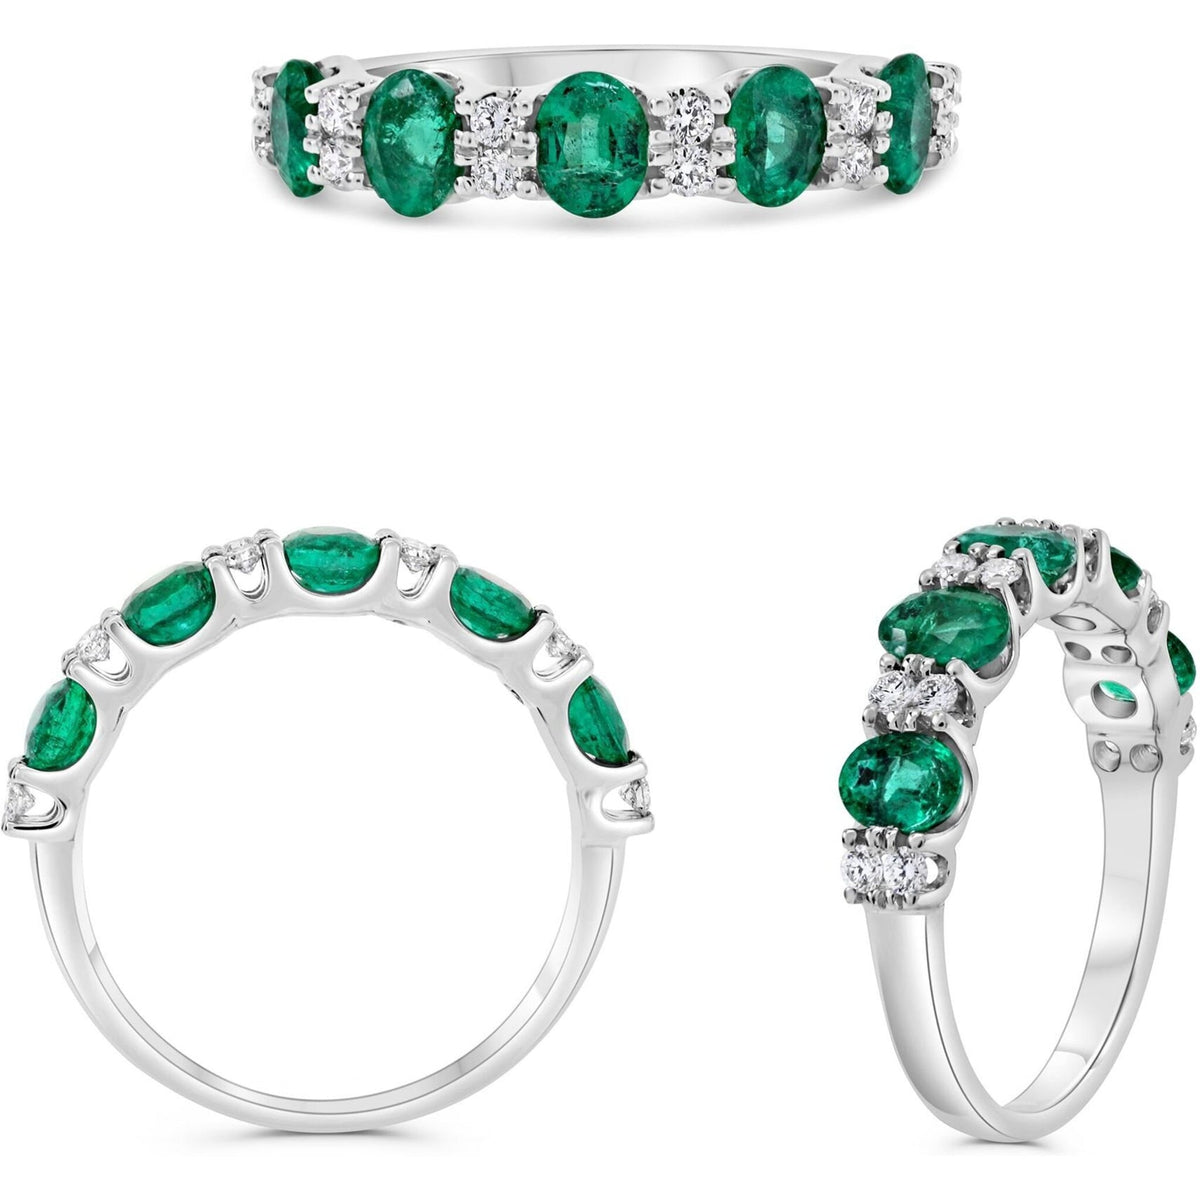 Exquisite 14k White Gold Oval Emerald Ring